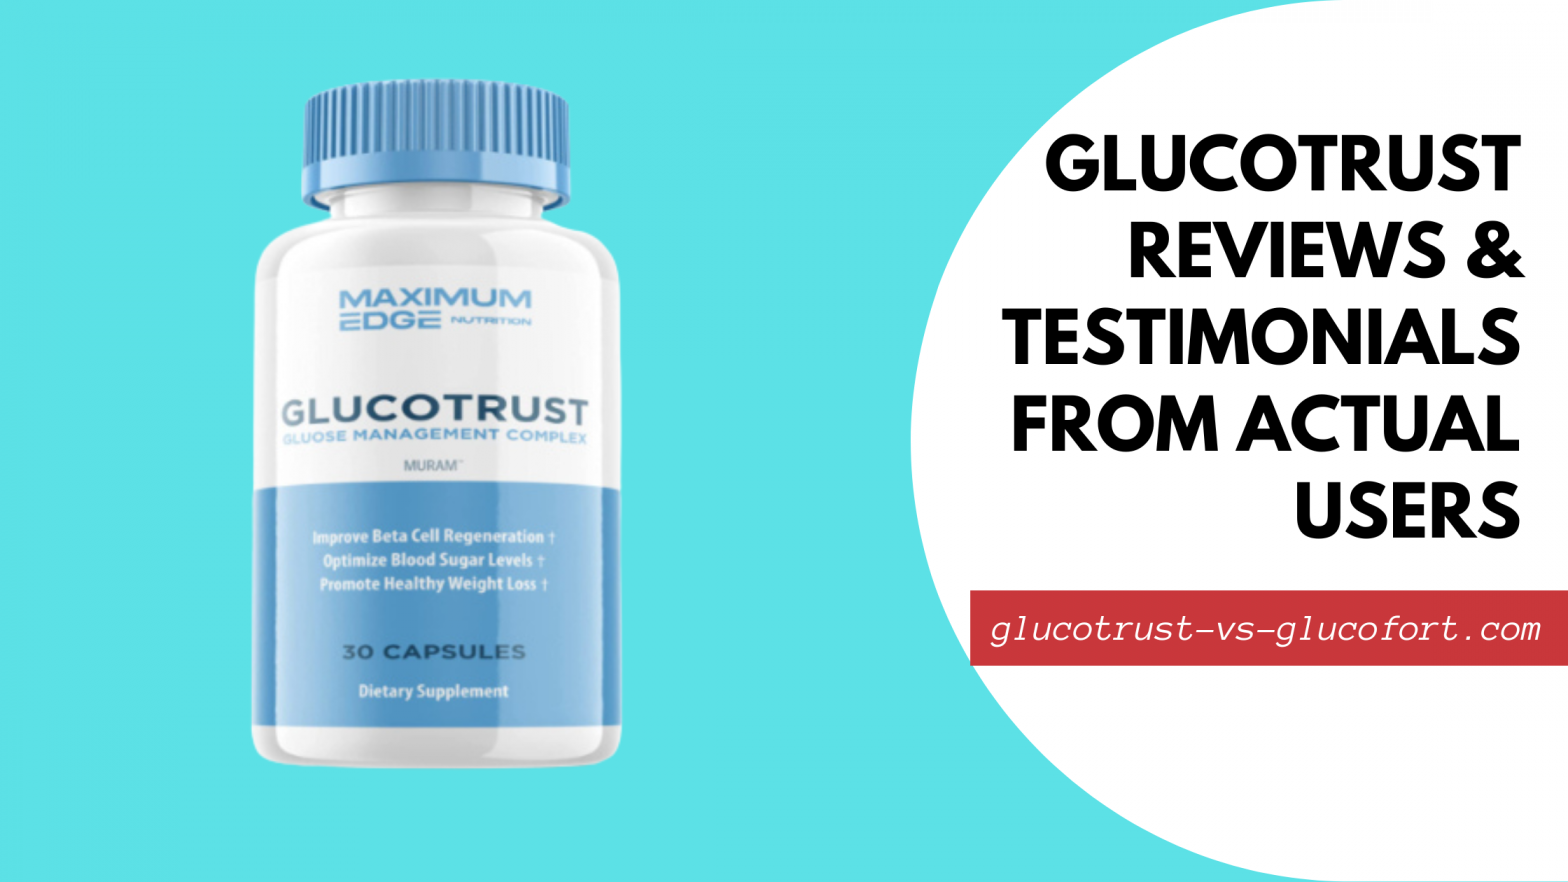 GlucoTrust Reviews Featured Image